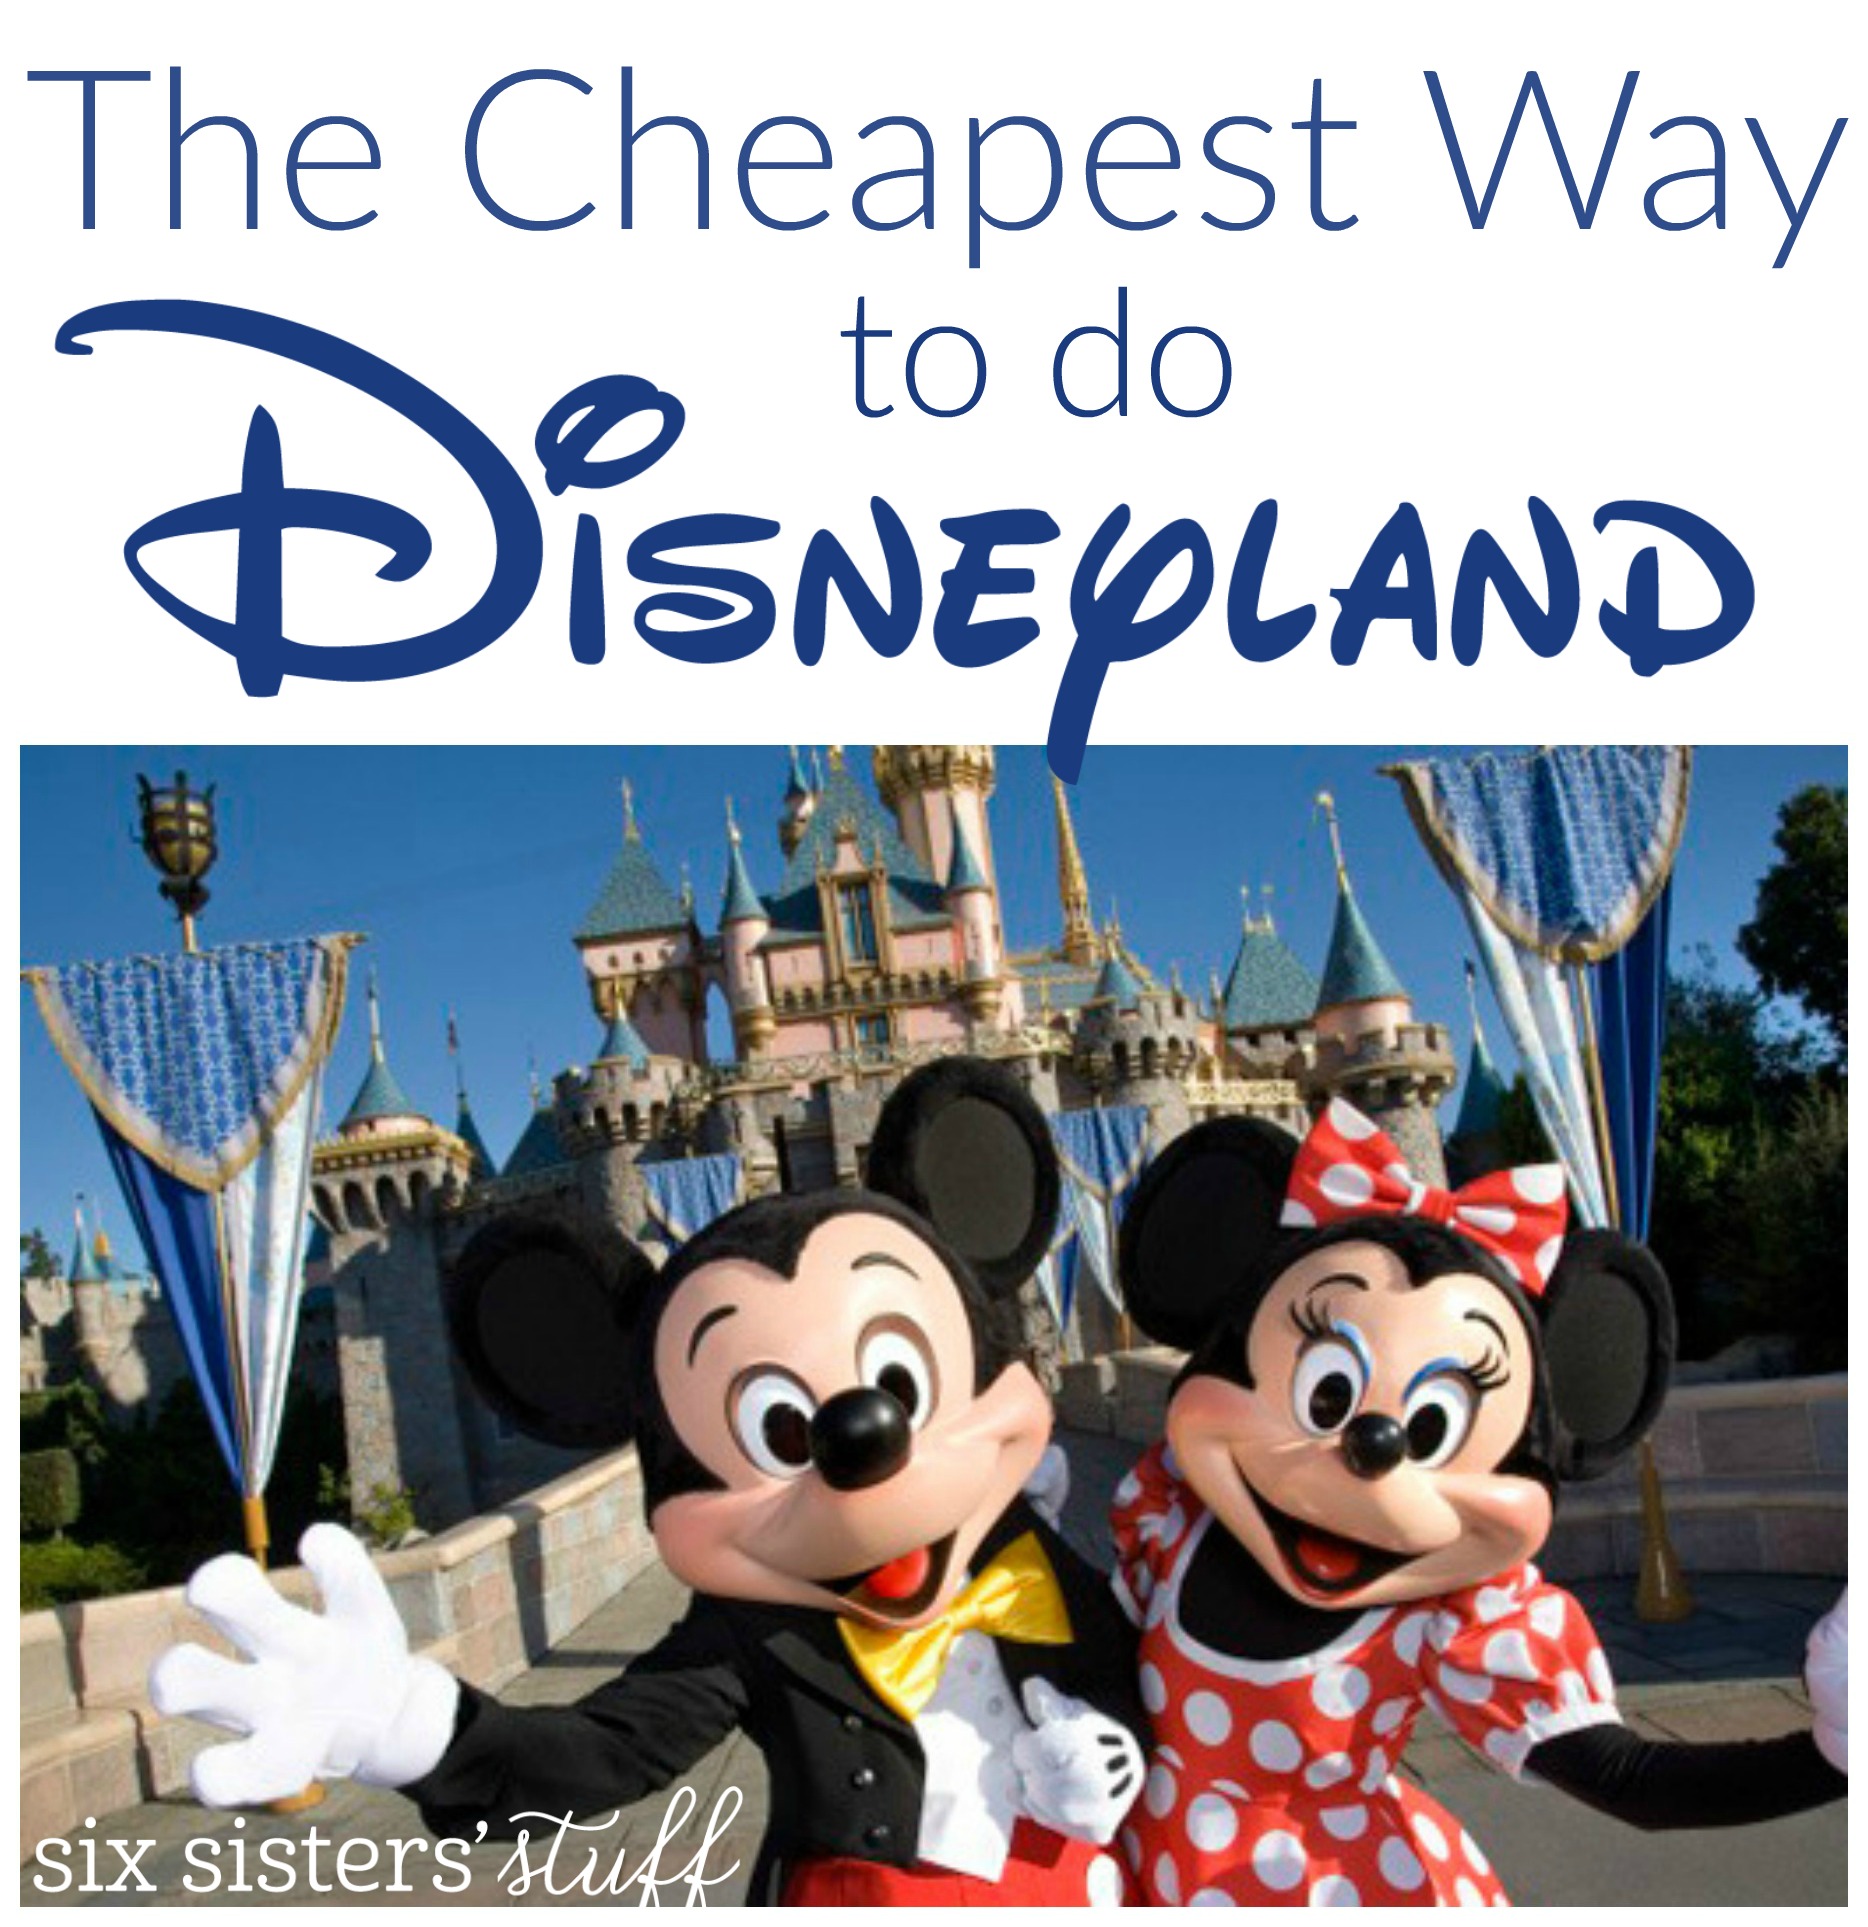 The Cheapest Way to do Disneyland!